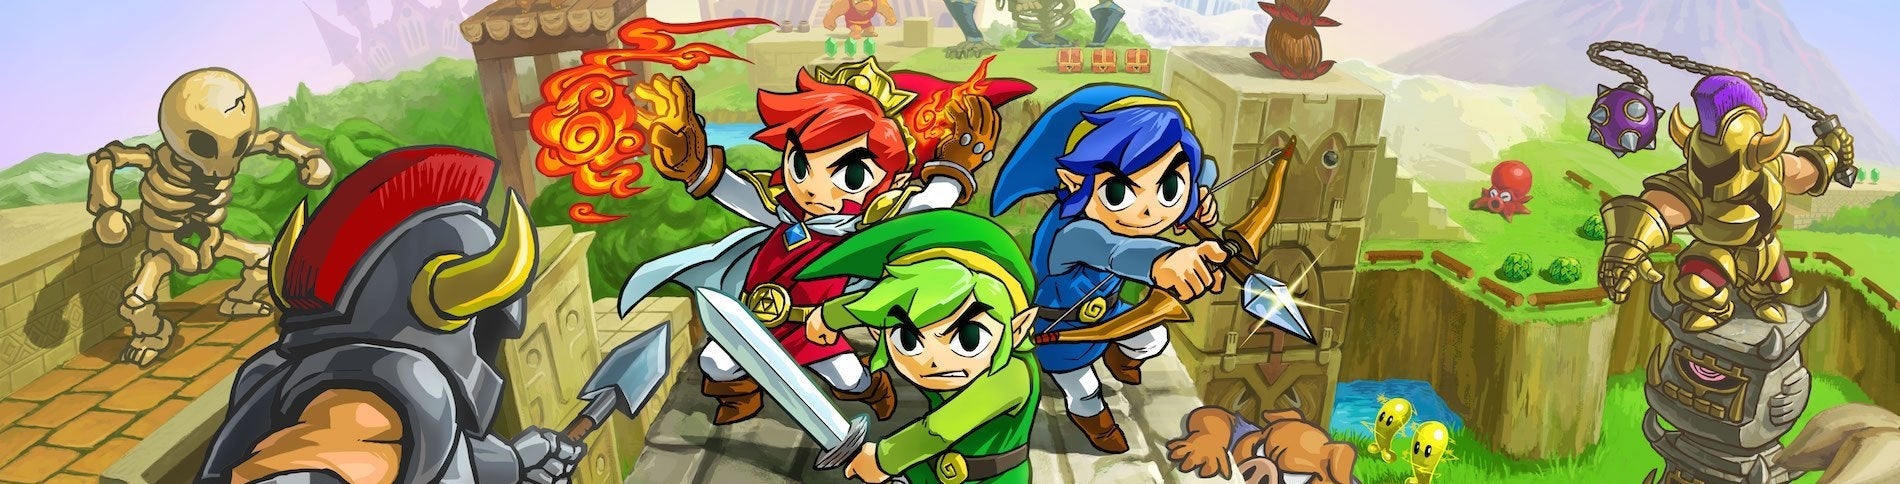 Image for The Legend of Zelda: Tri Force Heroes review